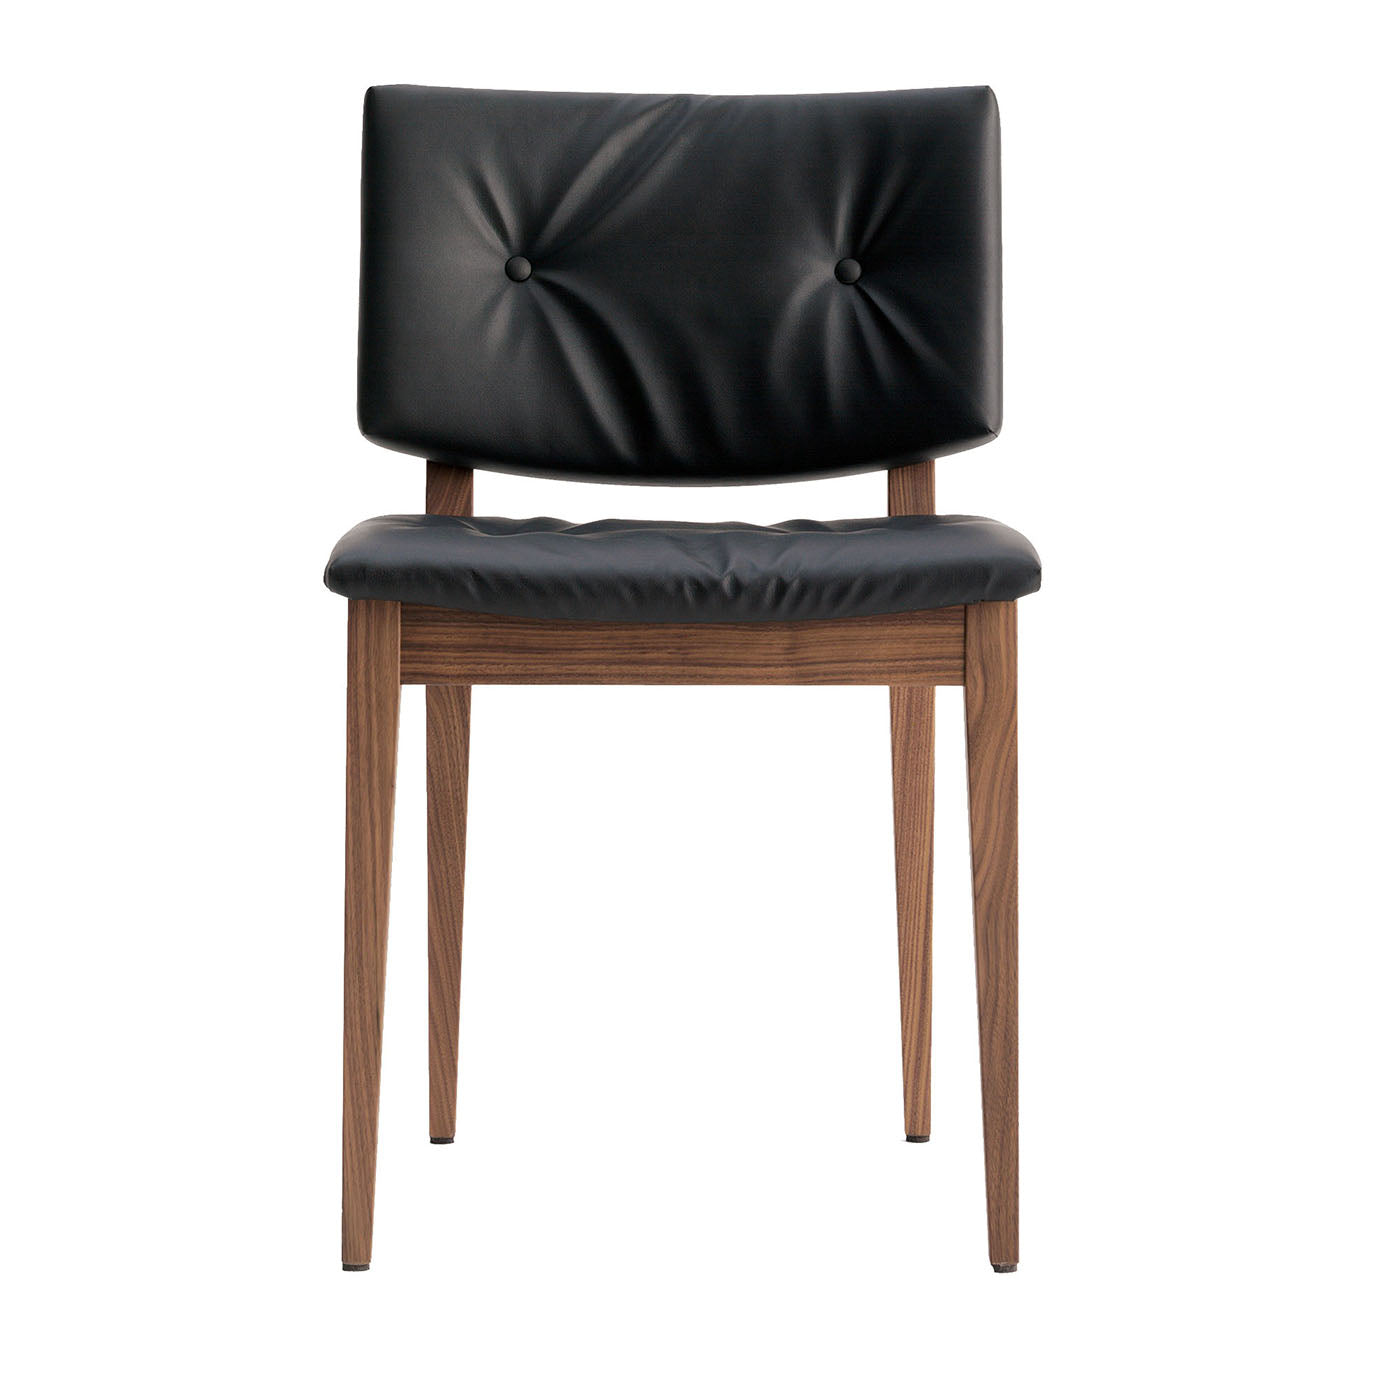 Eileen Small Brown & Black Chair by Werther Toffoloni - Main view